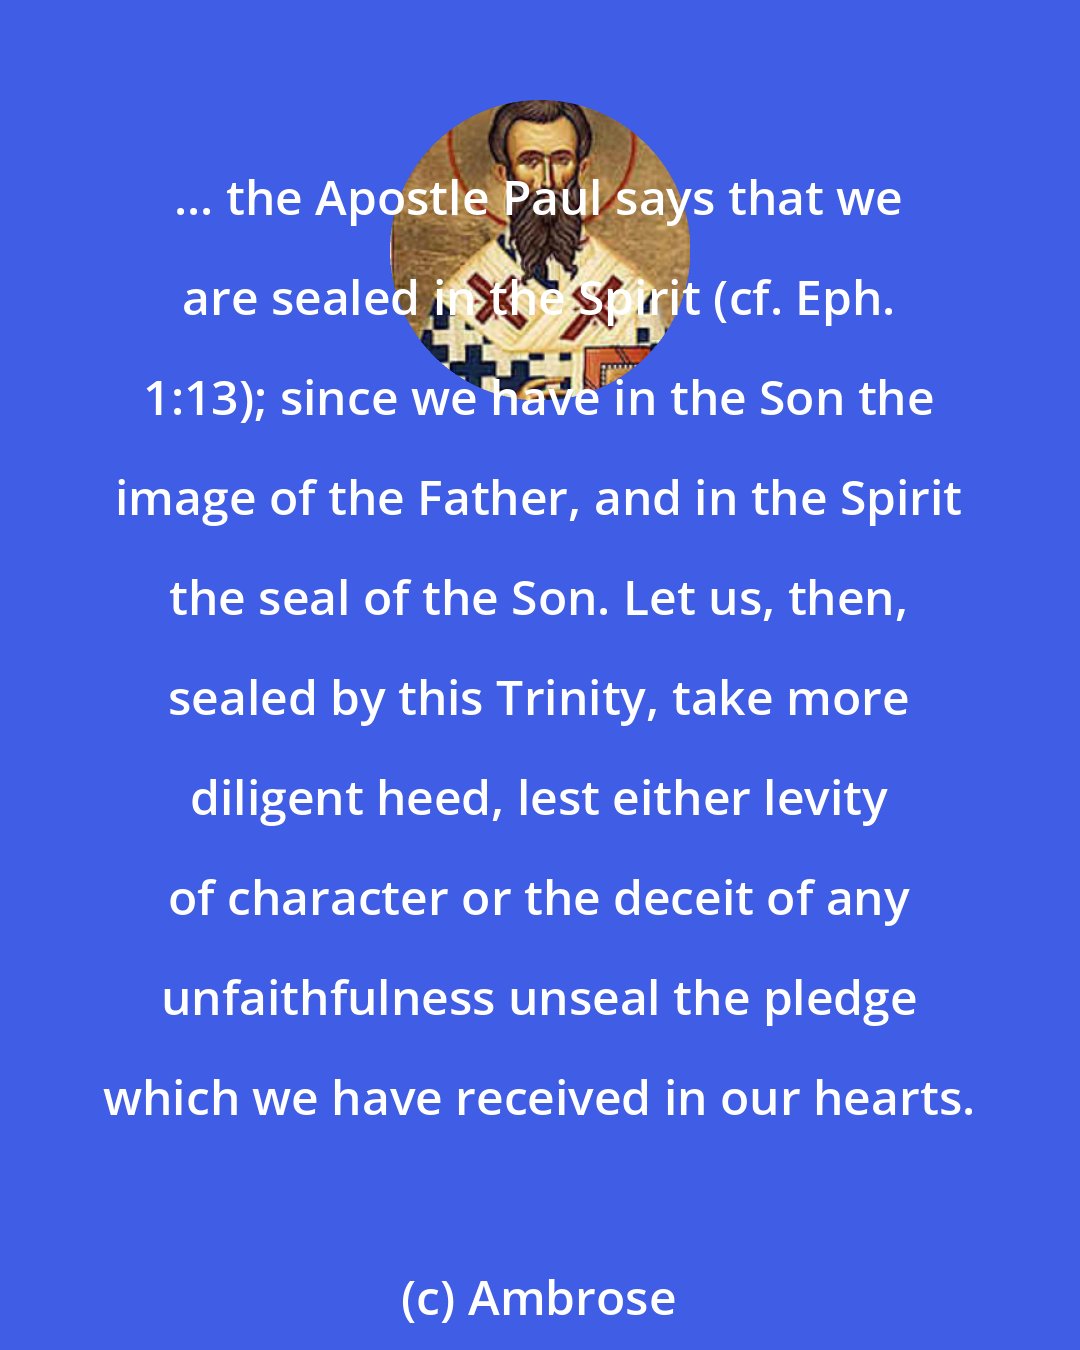 Ambrose: ... the Apostle Paul says that we are sealed in the Spirit (cf. Eph. 1:13); since we have in the Son the image of the Father, and in the Spirit the seal of the Son. Let us, then, sealed by this Trinity, take more diligent heed, lest either levity of character or the deceit of any unfaithfulness unseal the pledge which we have received in our hearts.